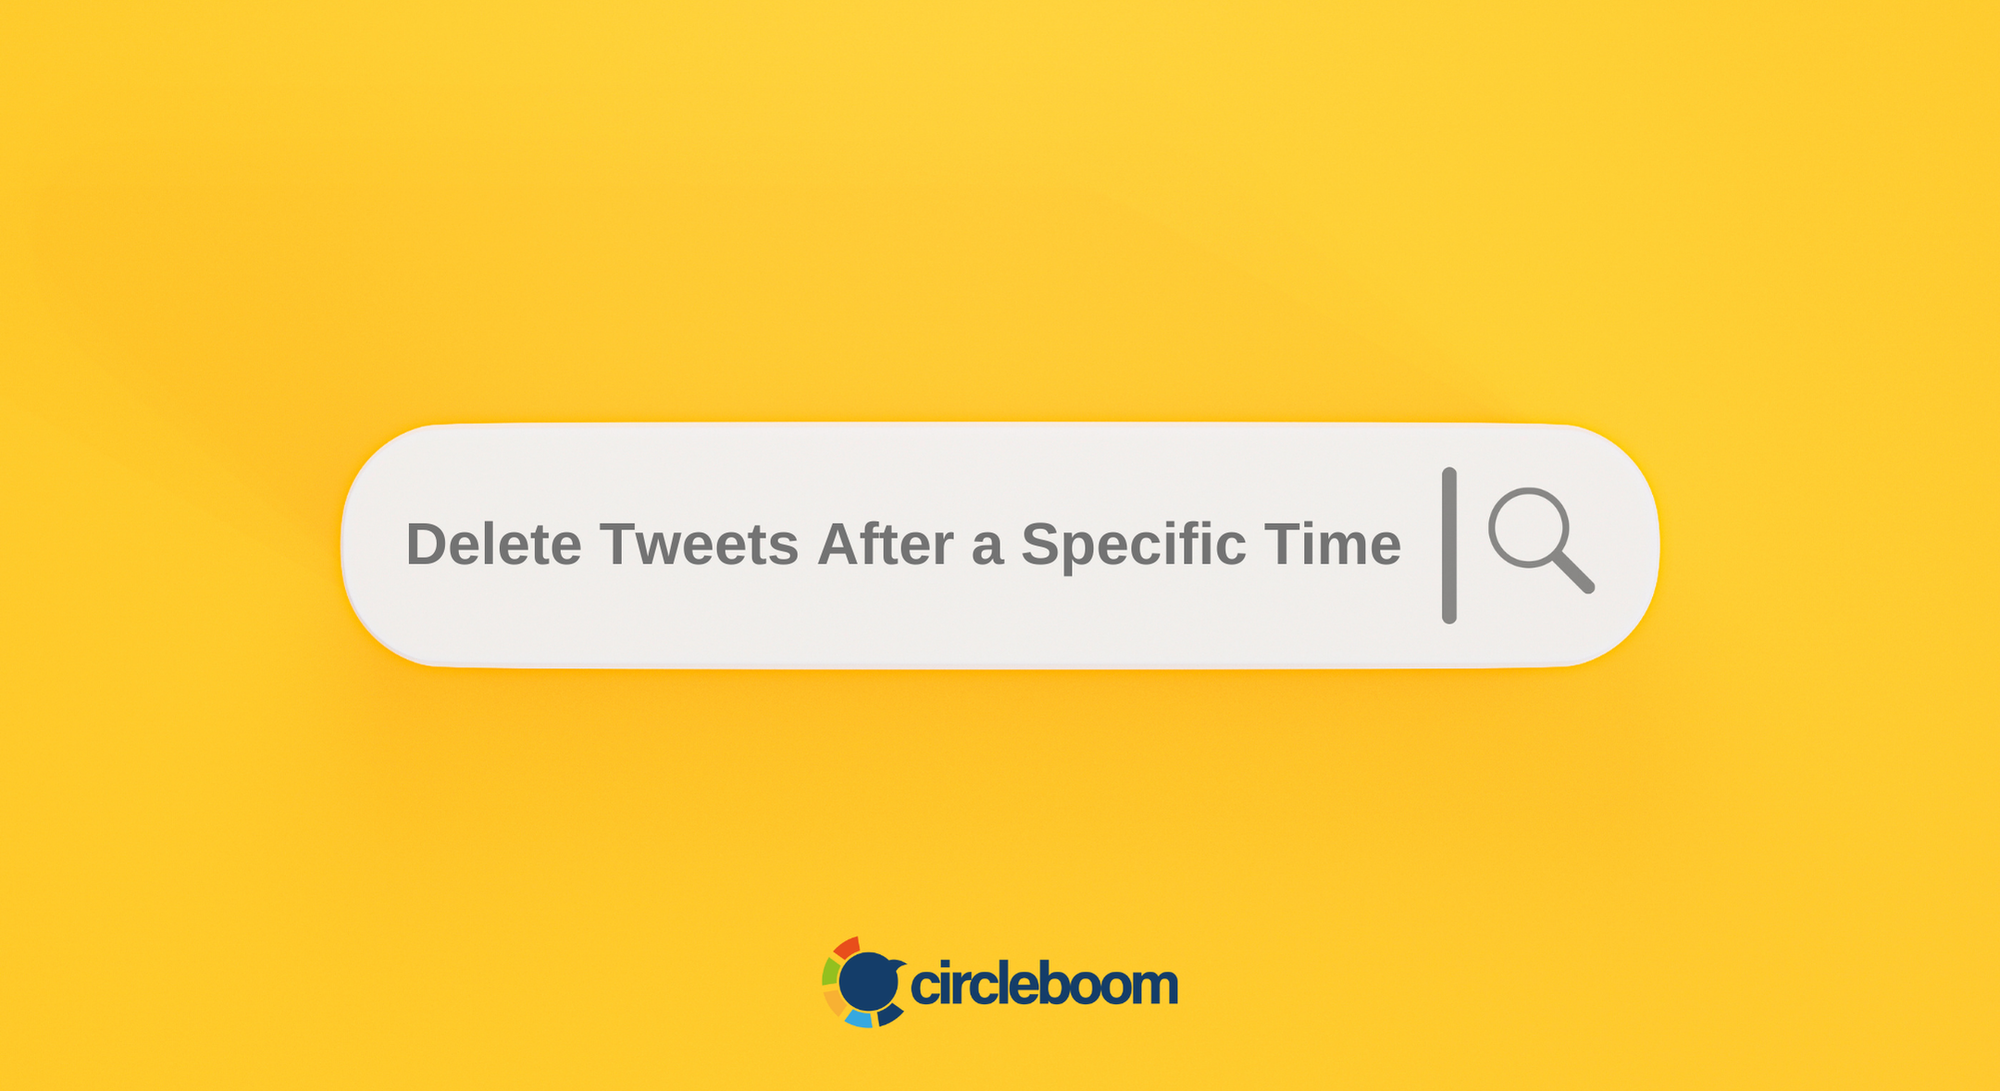 Delete Tweets After a Specific Time